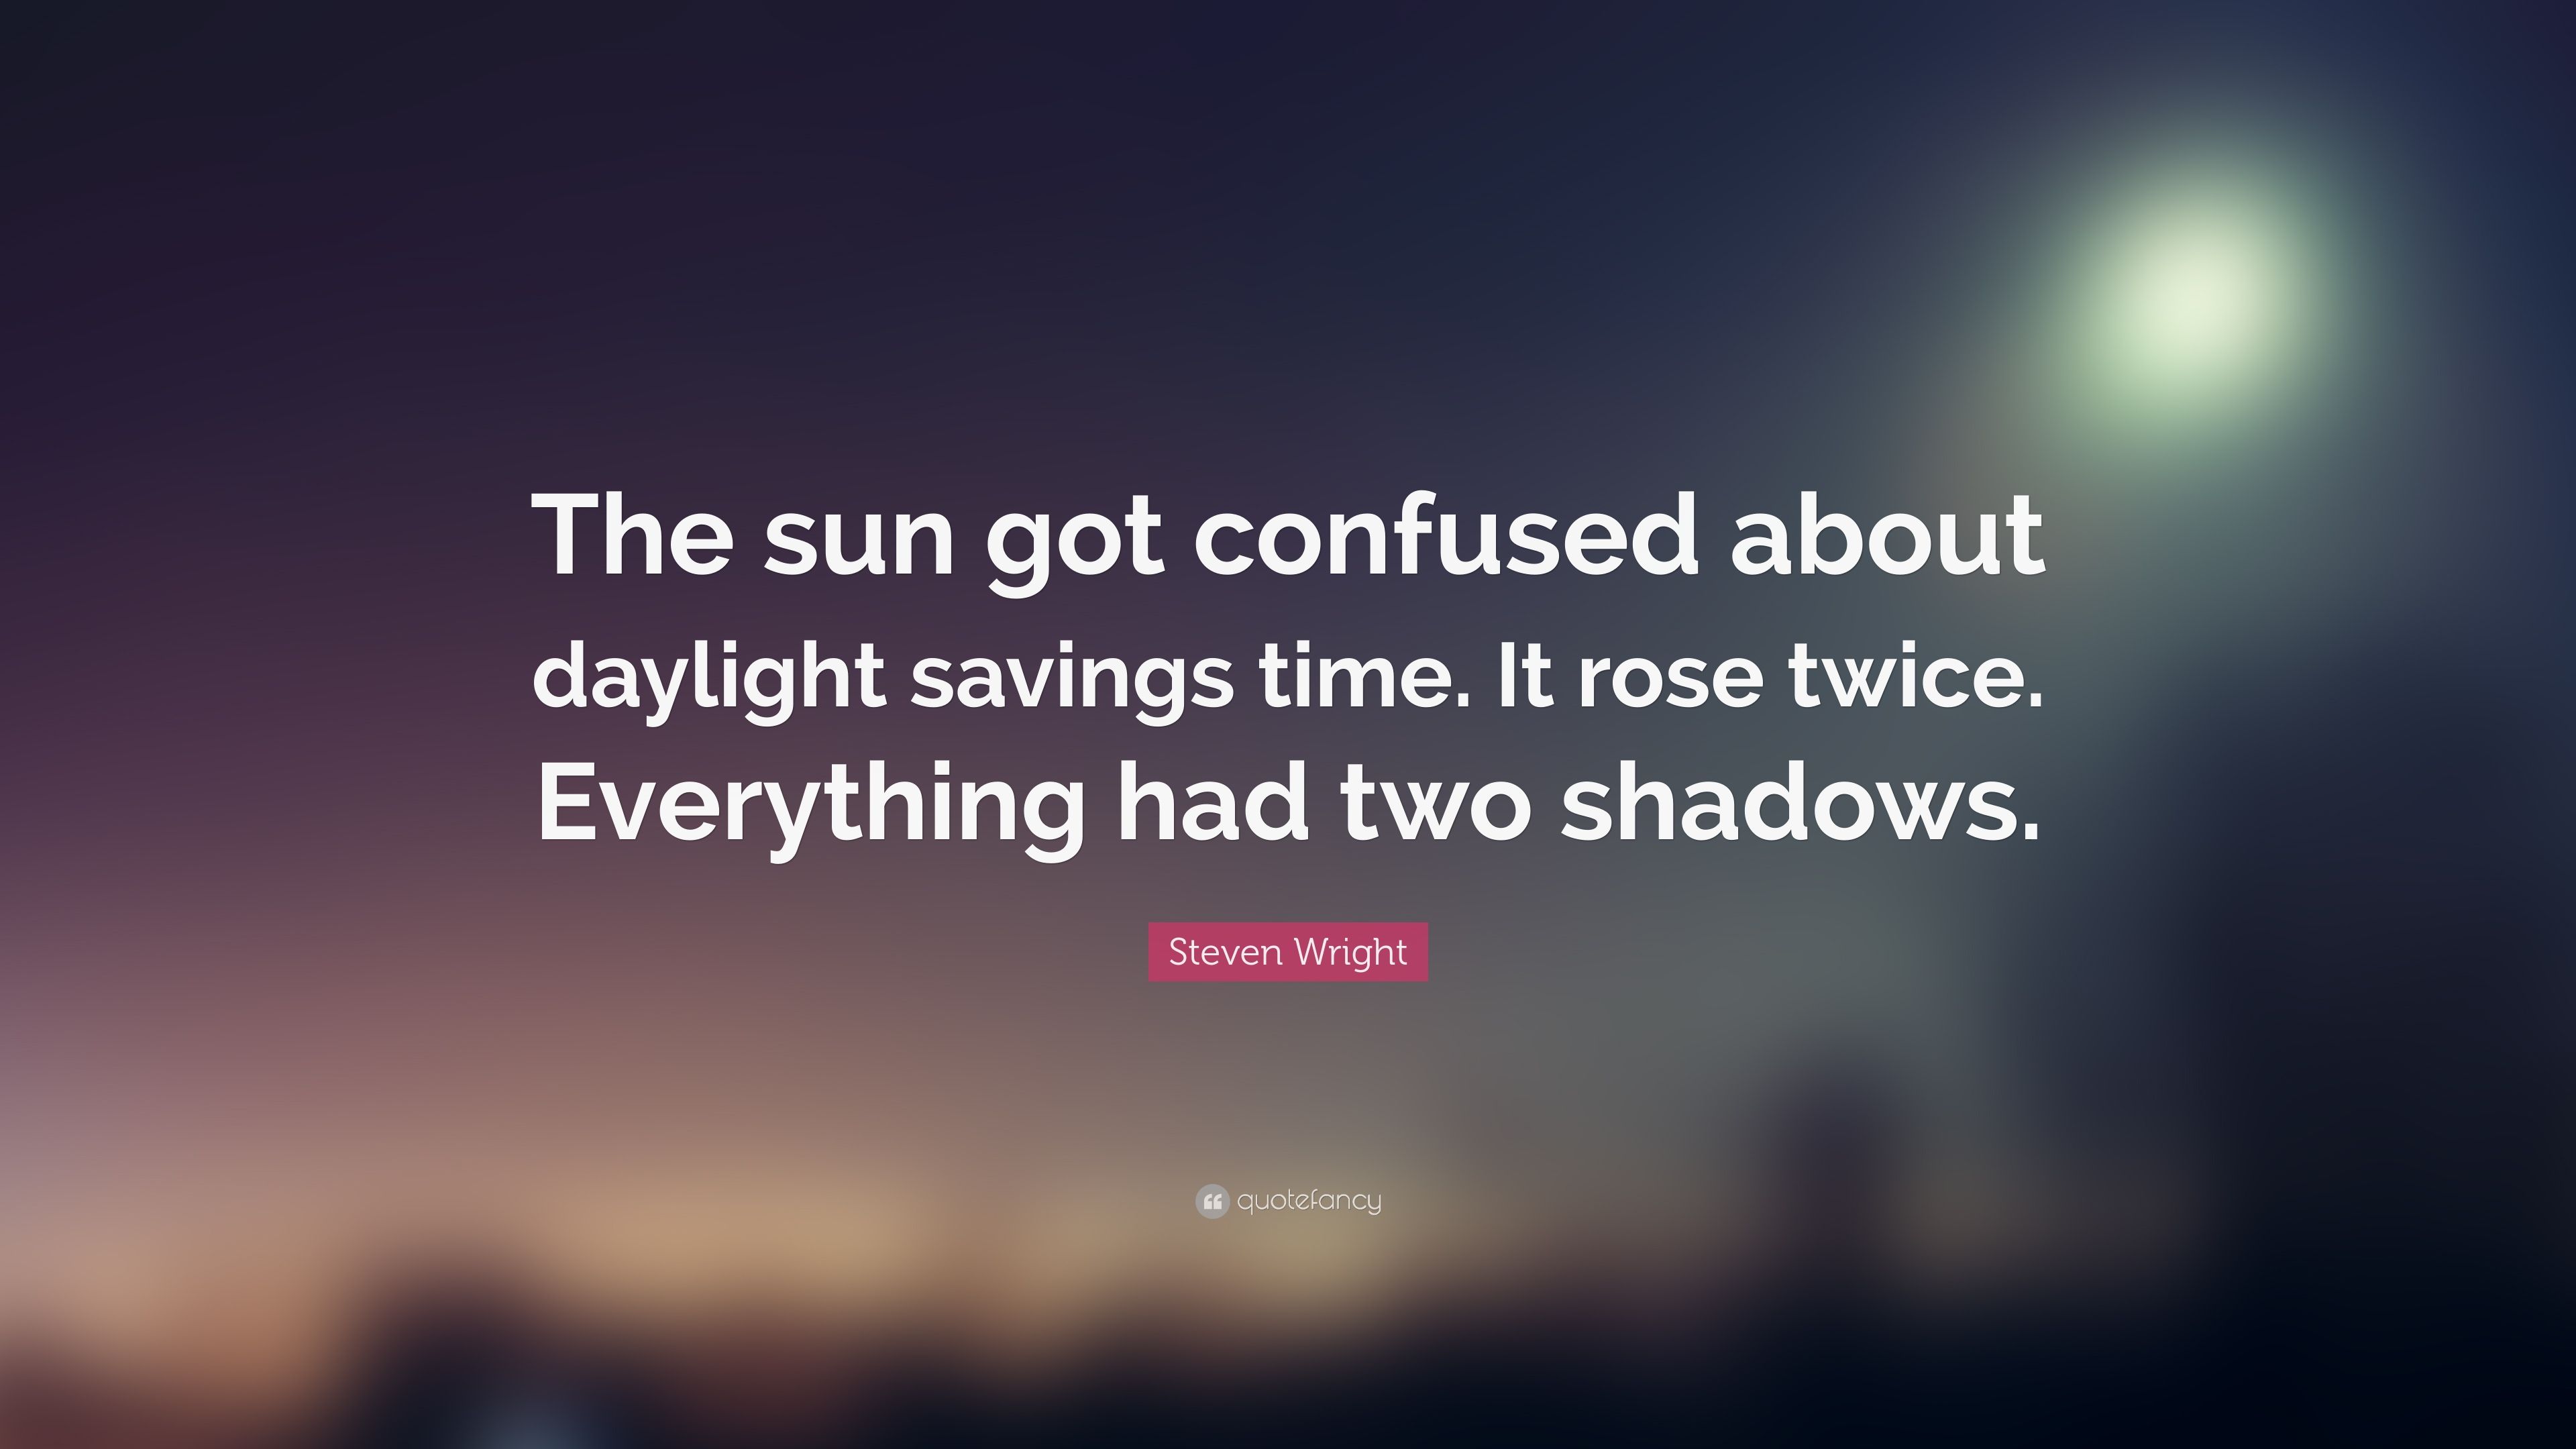 Steven Wright Quote: “The sun got confused about daylight savings